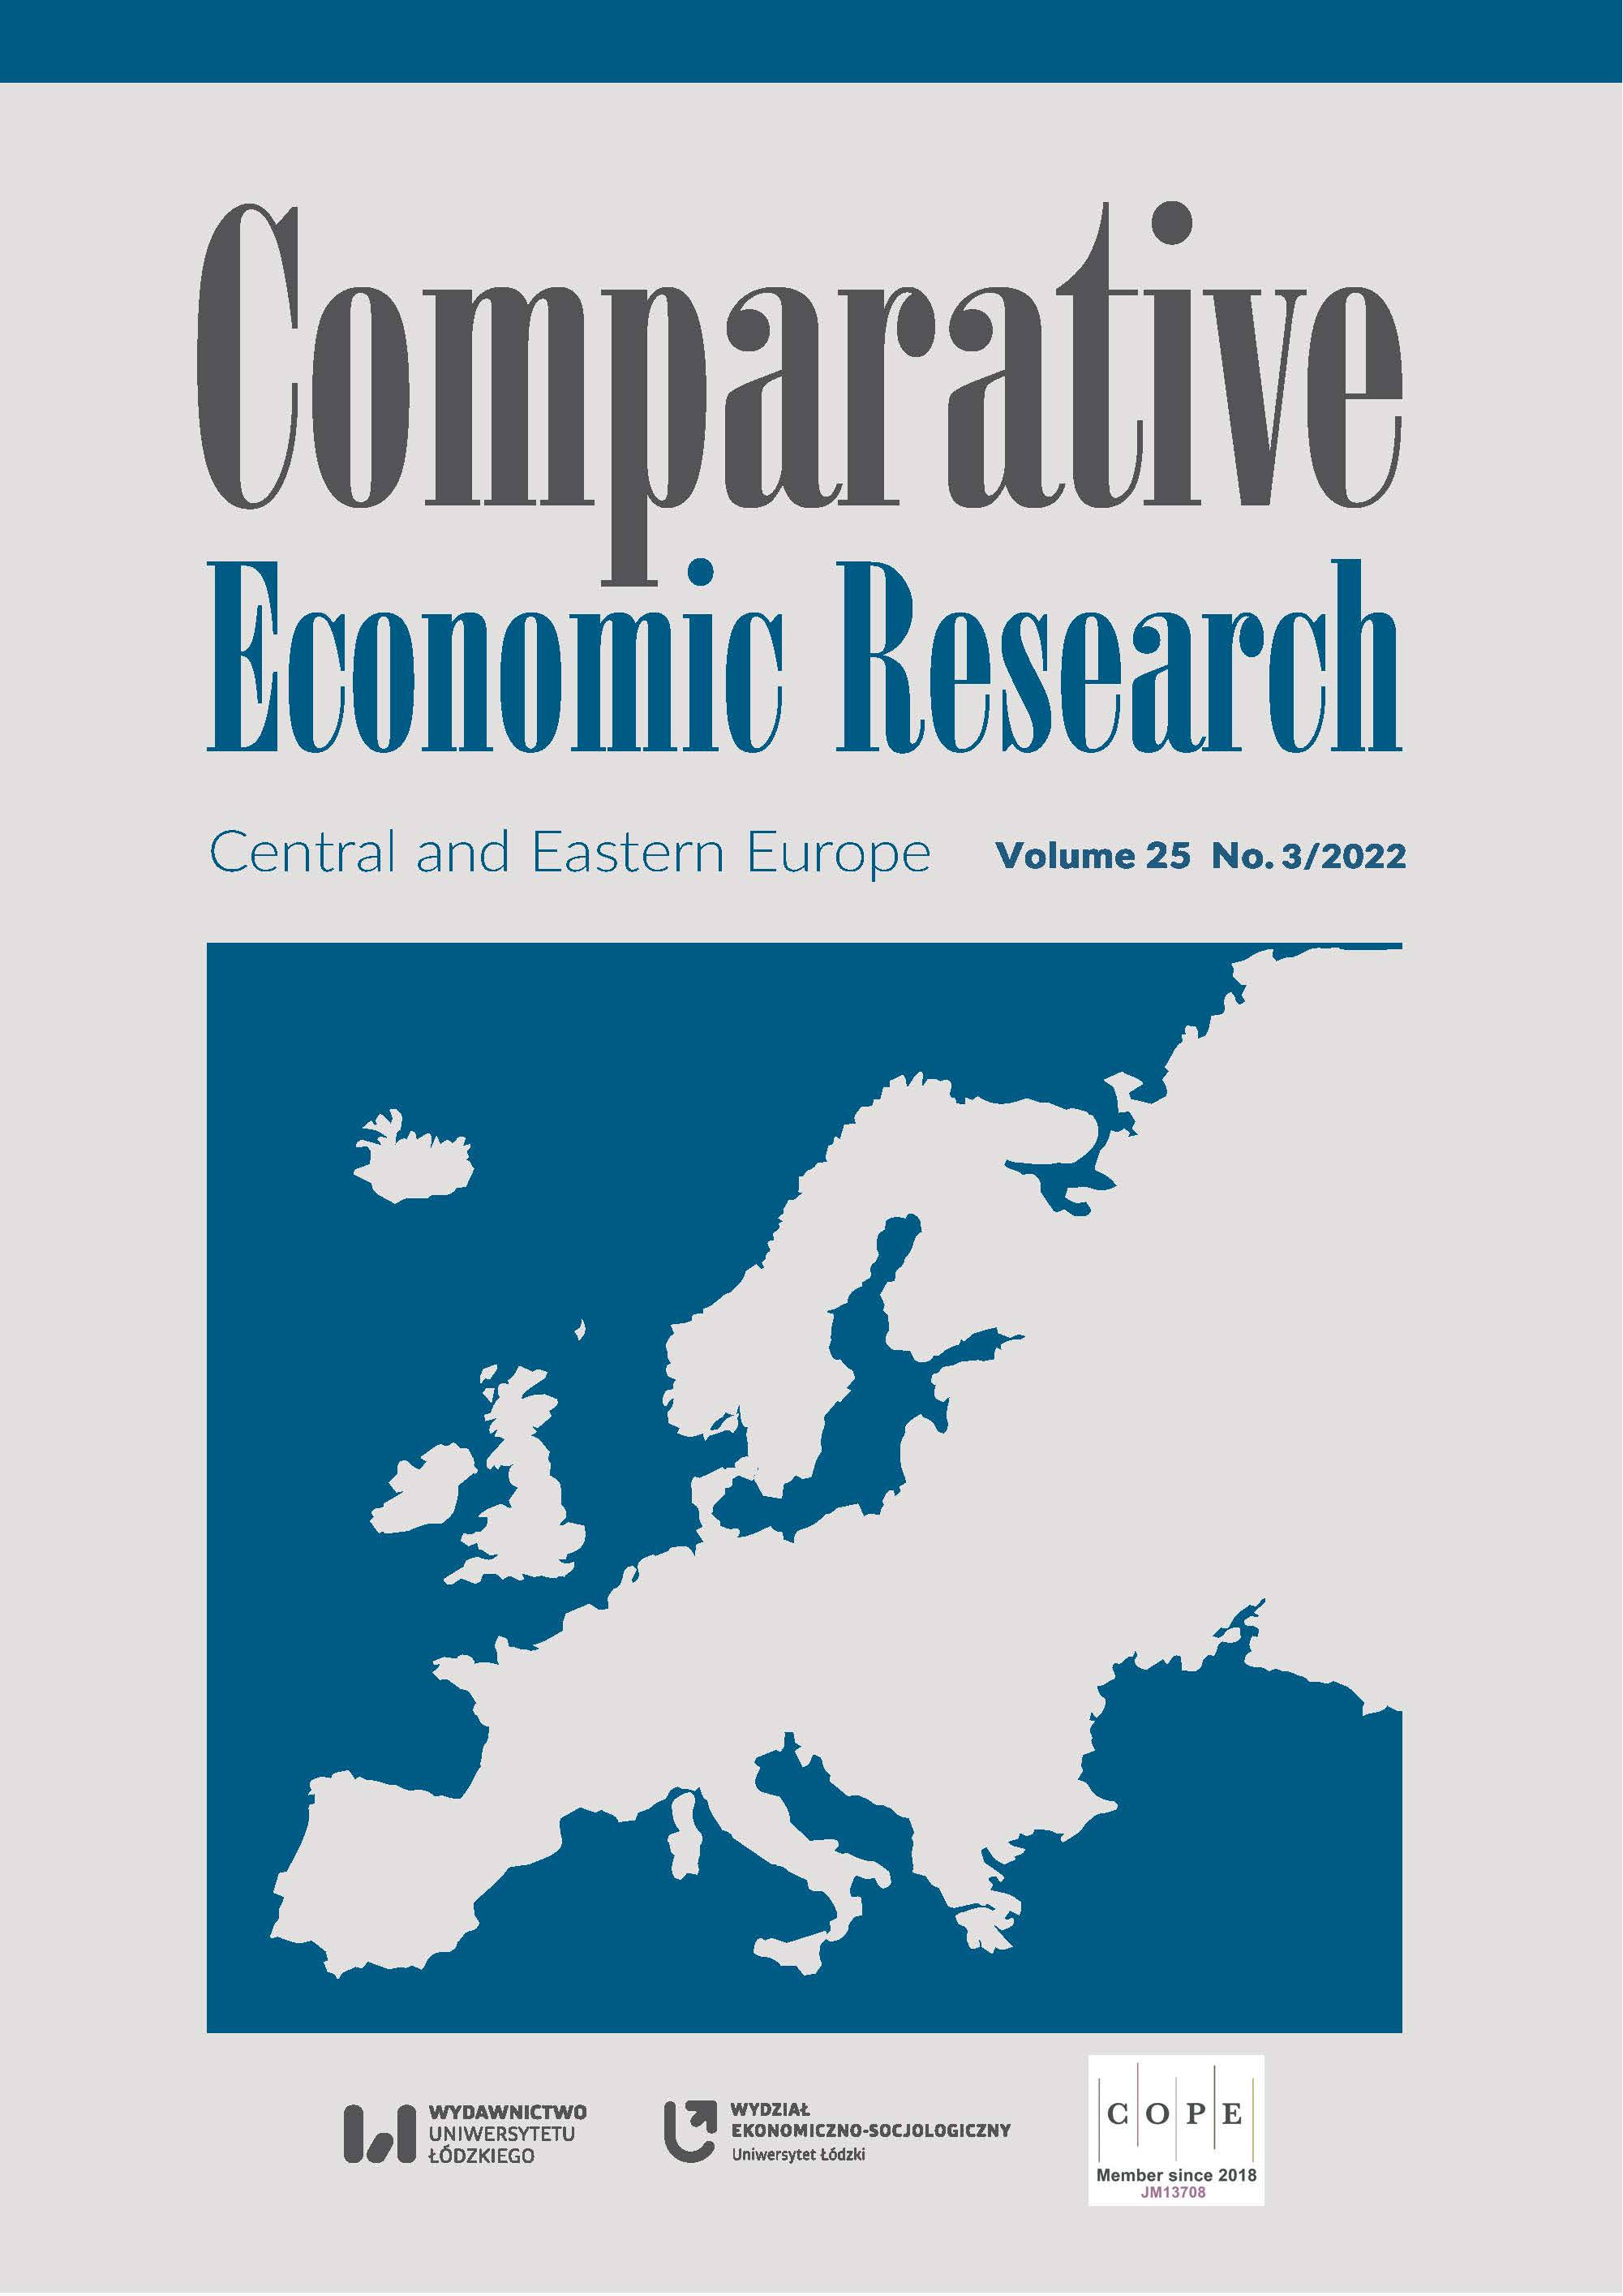 A Comparison of the Effects of Capital and Labour Taxes in CEE Countries